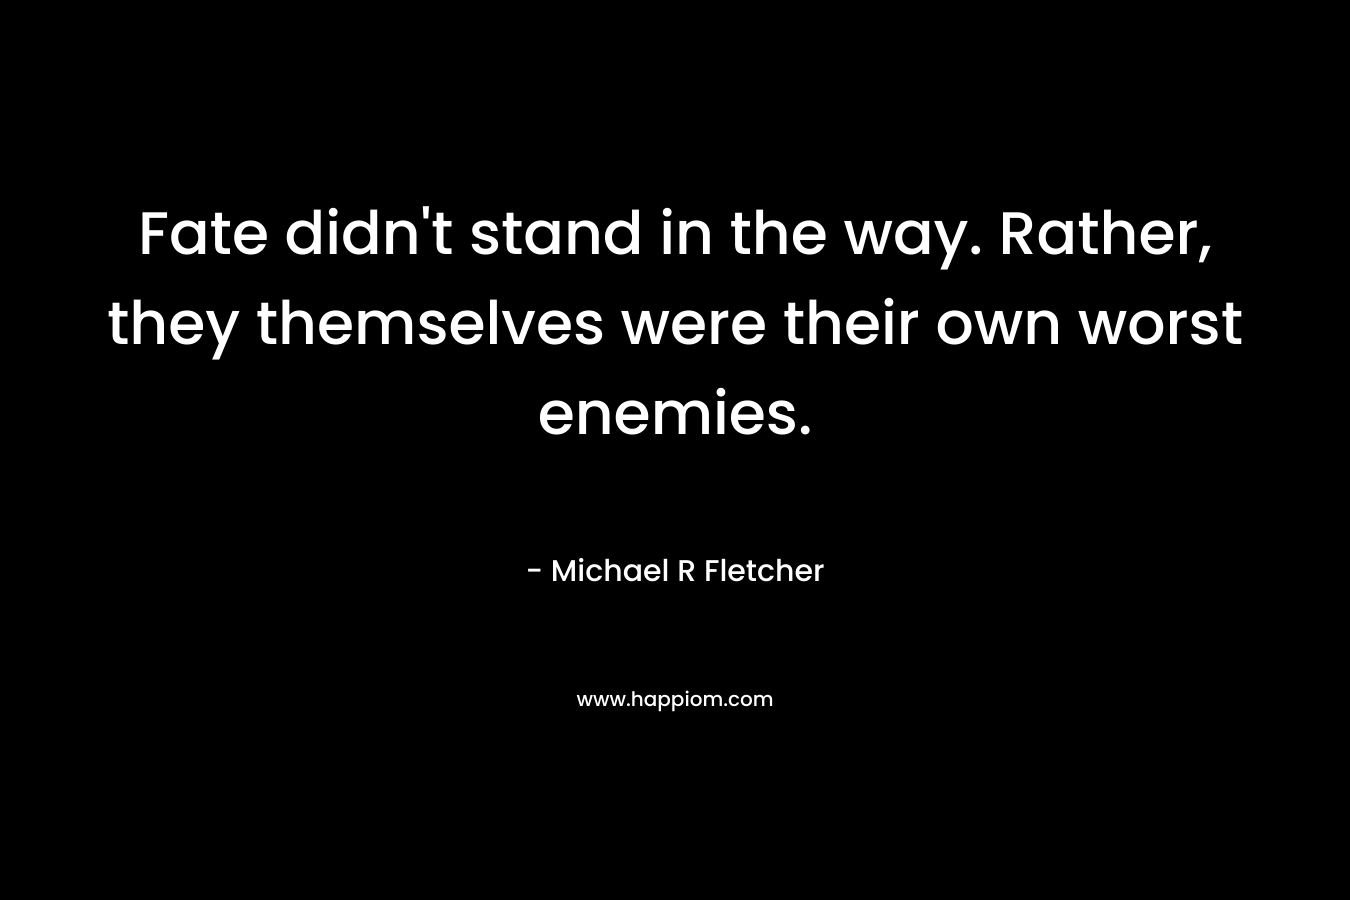 Fate didn’t stand in the way. Rather, they themselves were their own worst enemies. – Michael R Fletcher